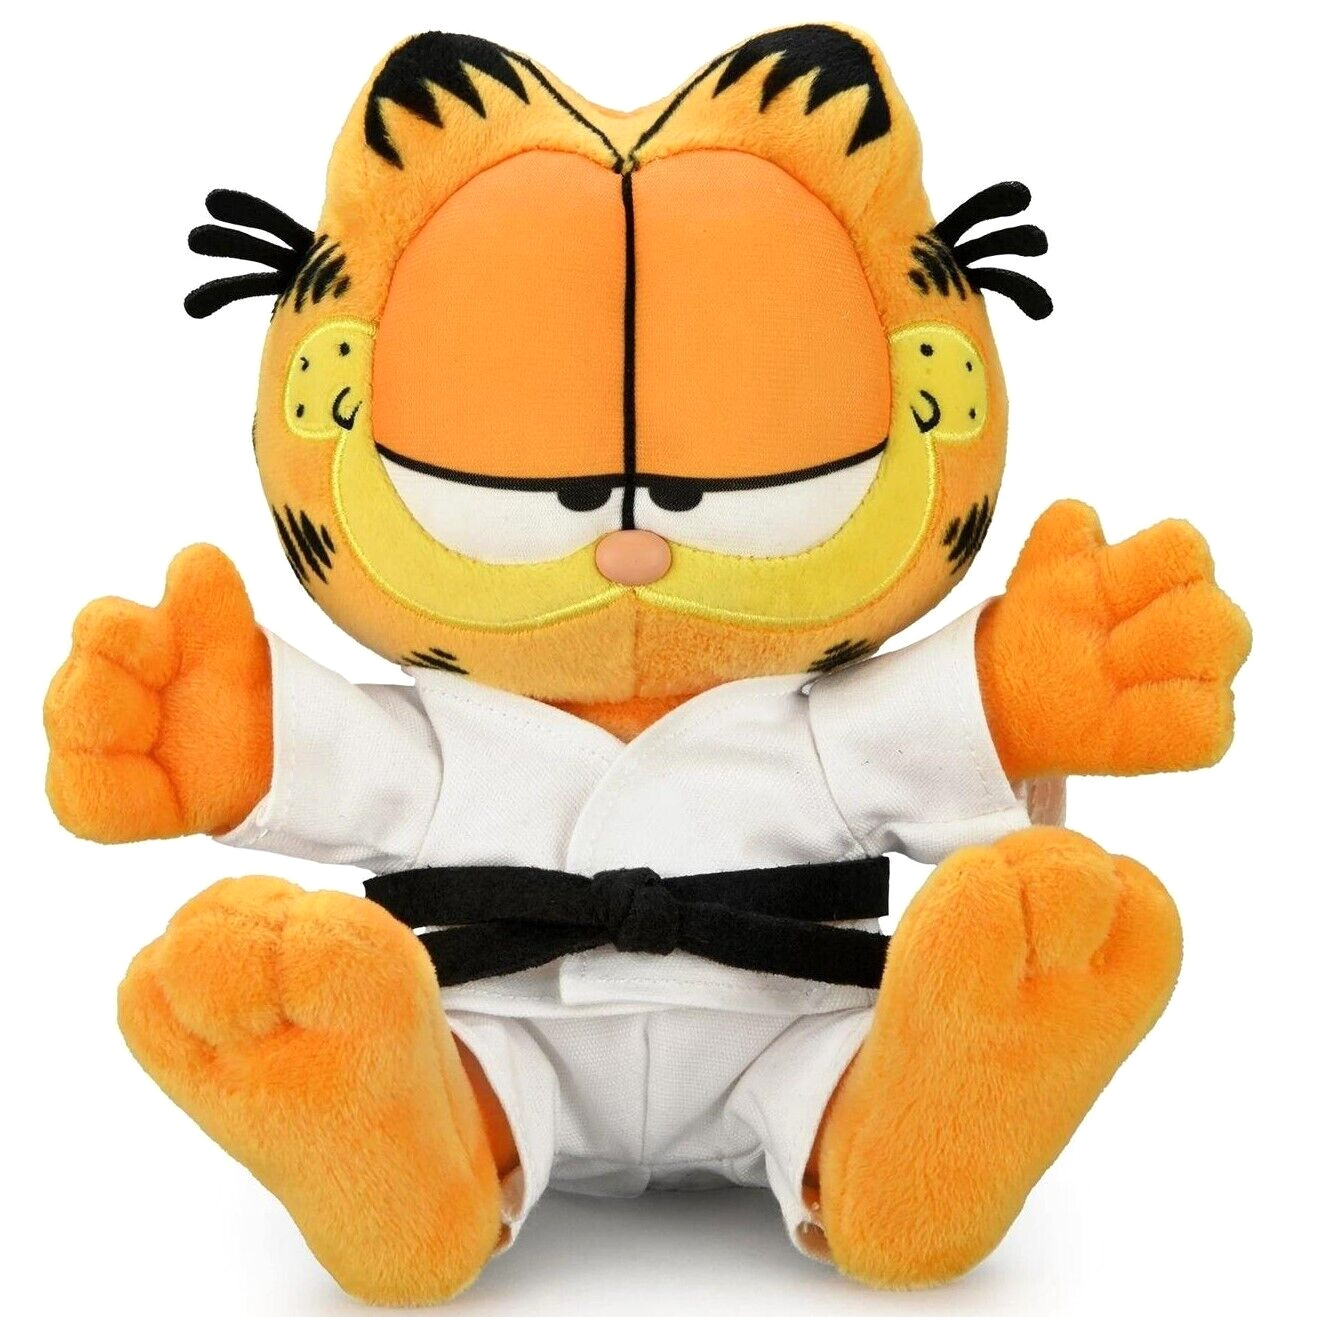 ✿ New GARFIELD Fat Tabby Cat KARATE OUTFIT Stuffed Plush Toy Dressed Plushie